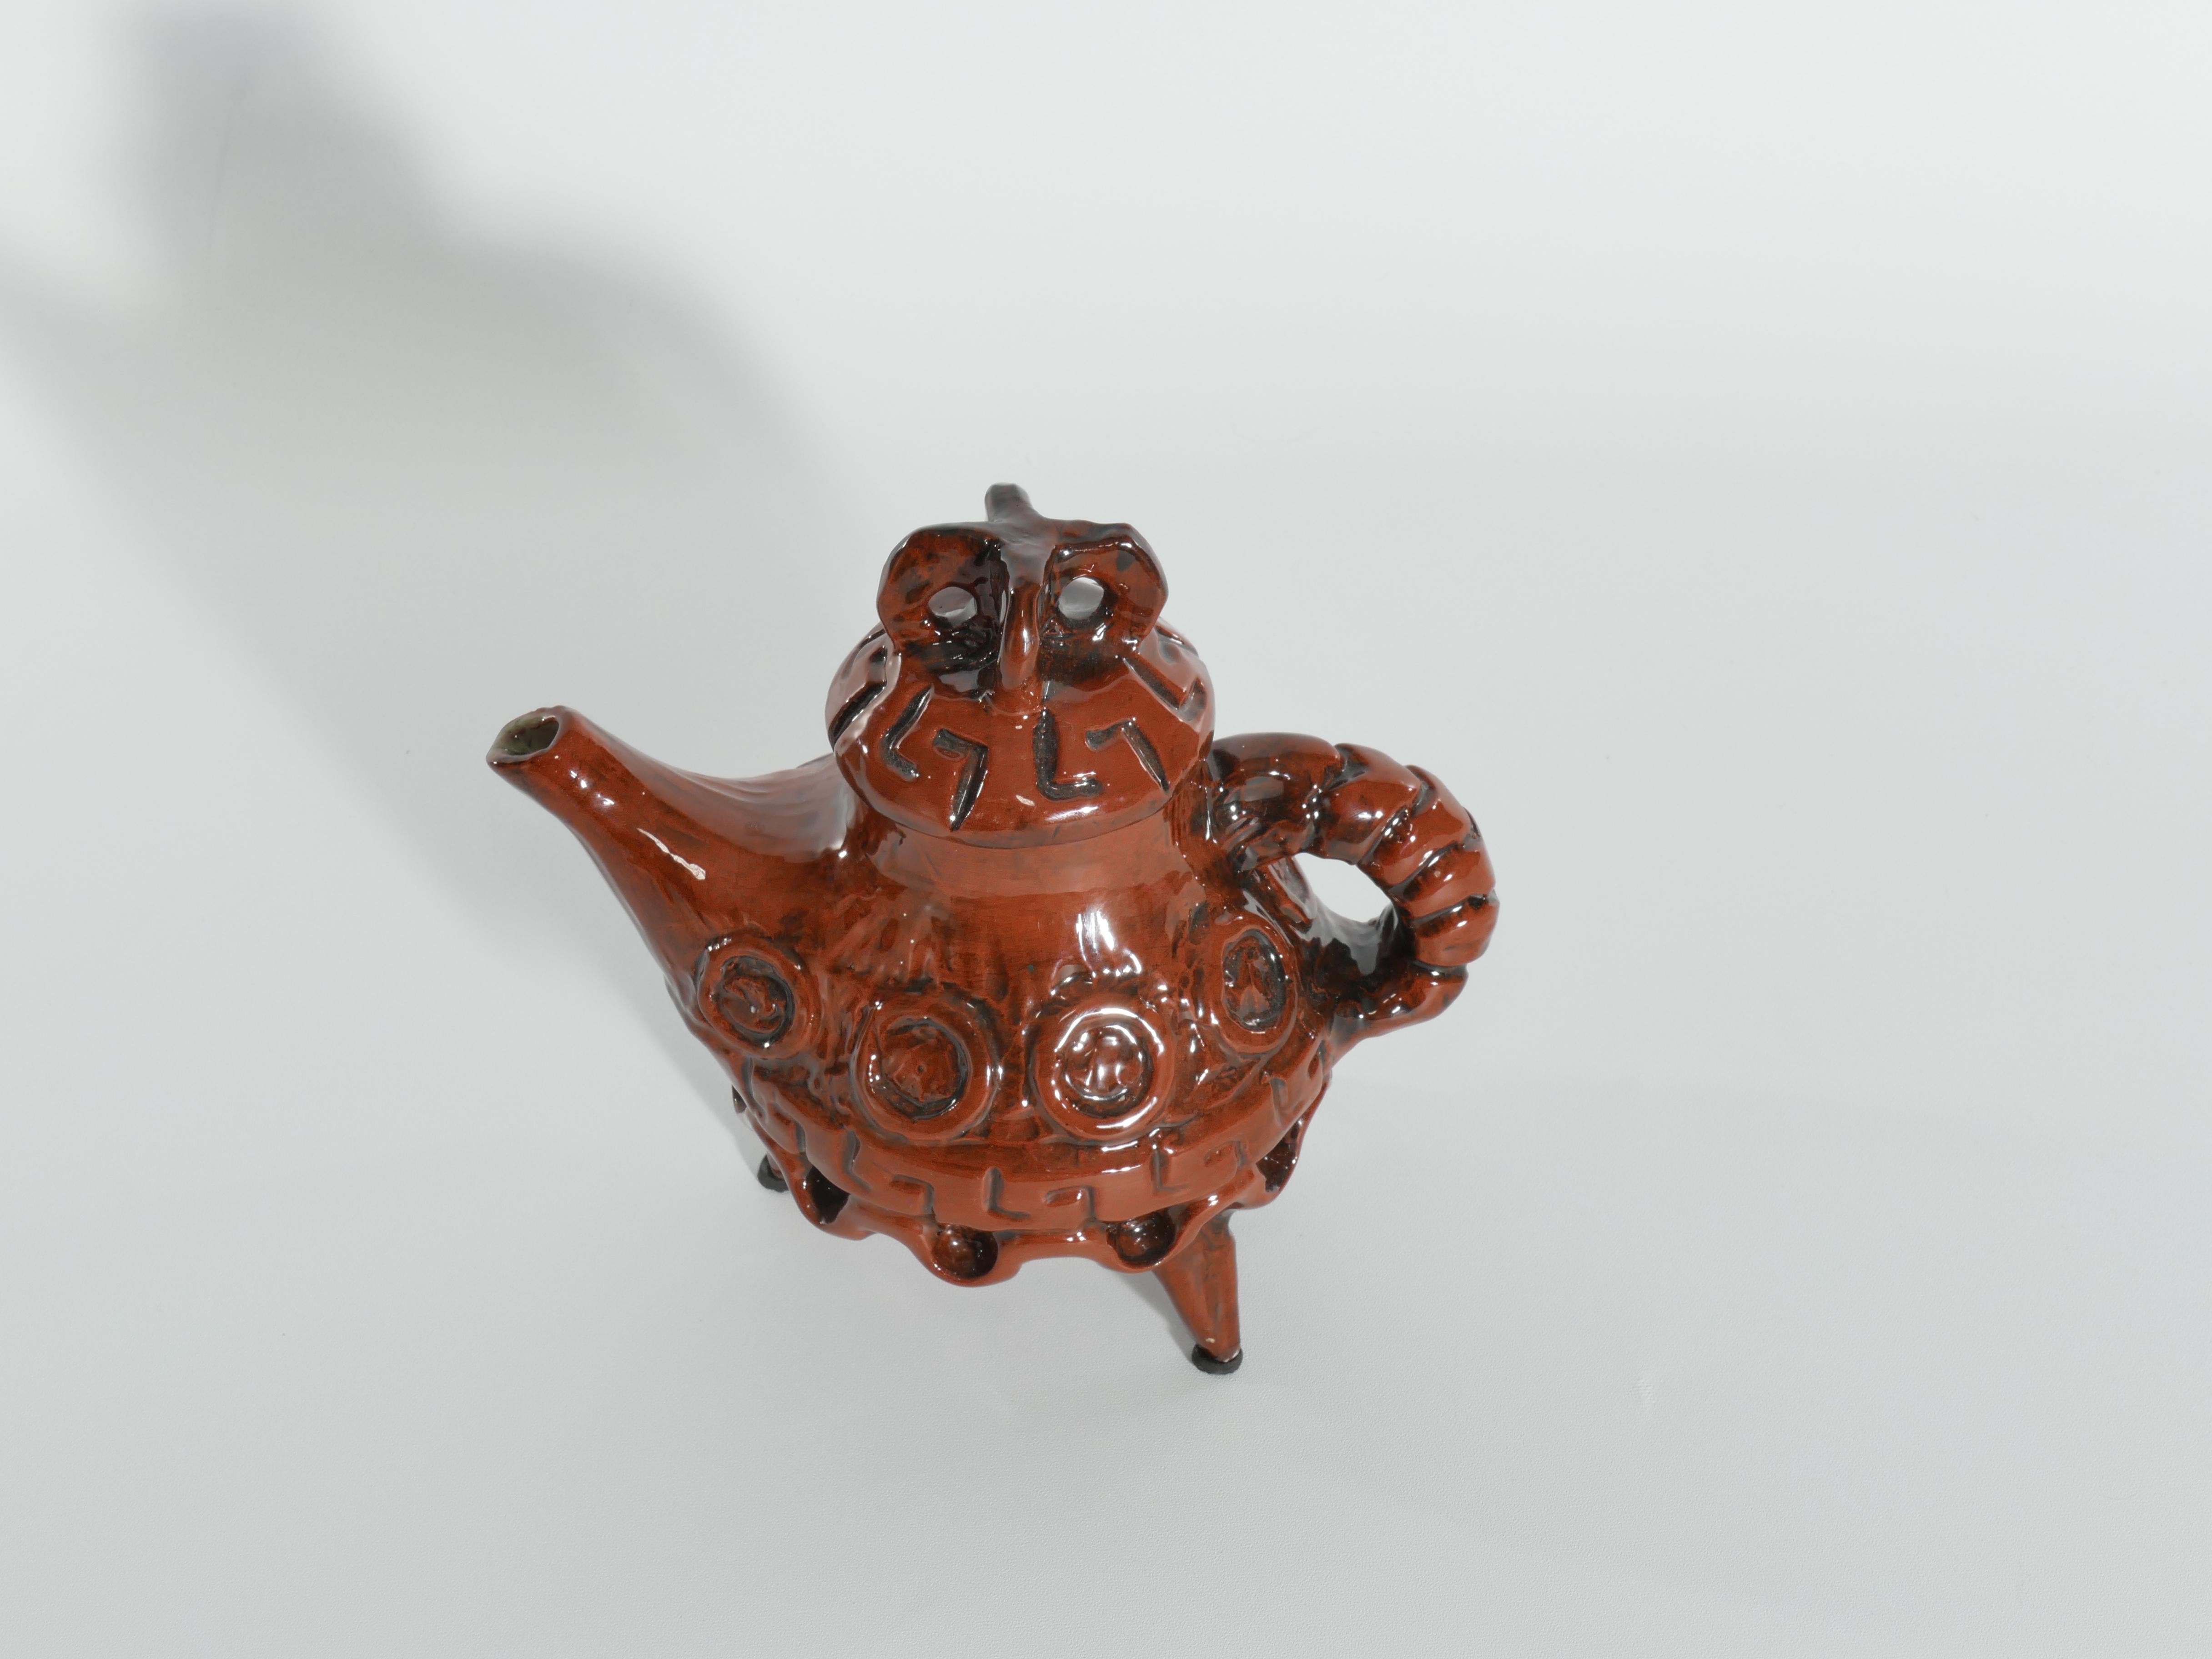 Vintage Playful Teapot with Crab-like Features by Allan Hellman Sweden 1982  For Sale 6